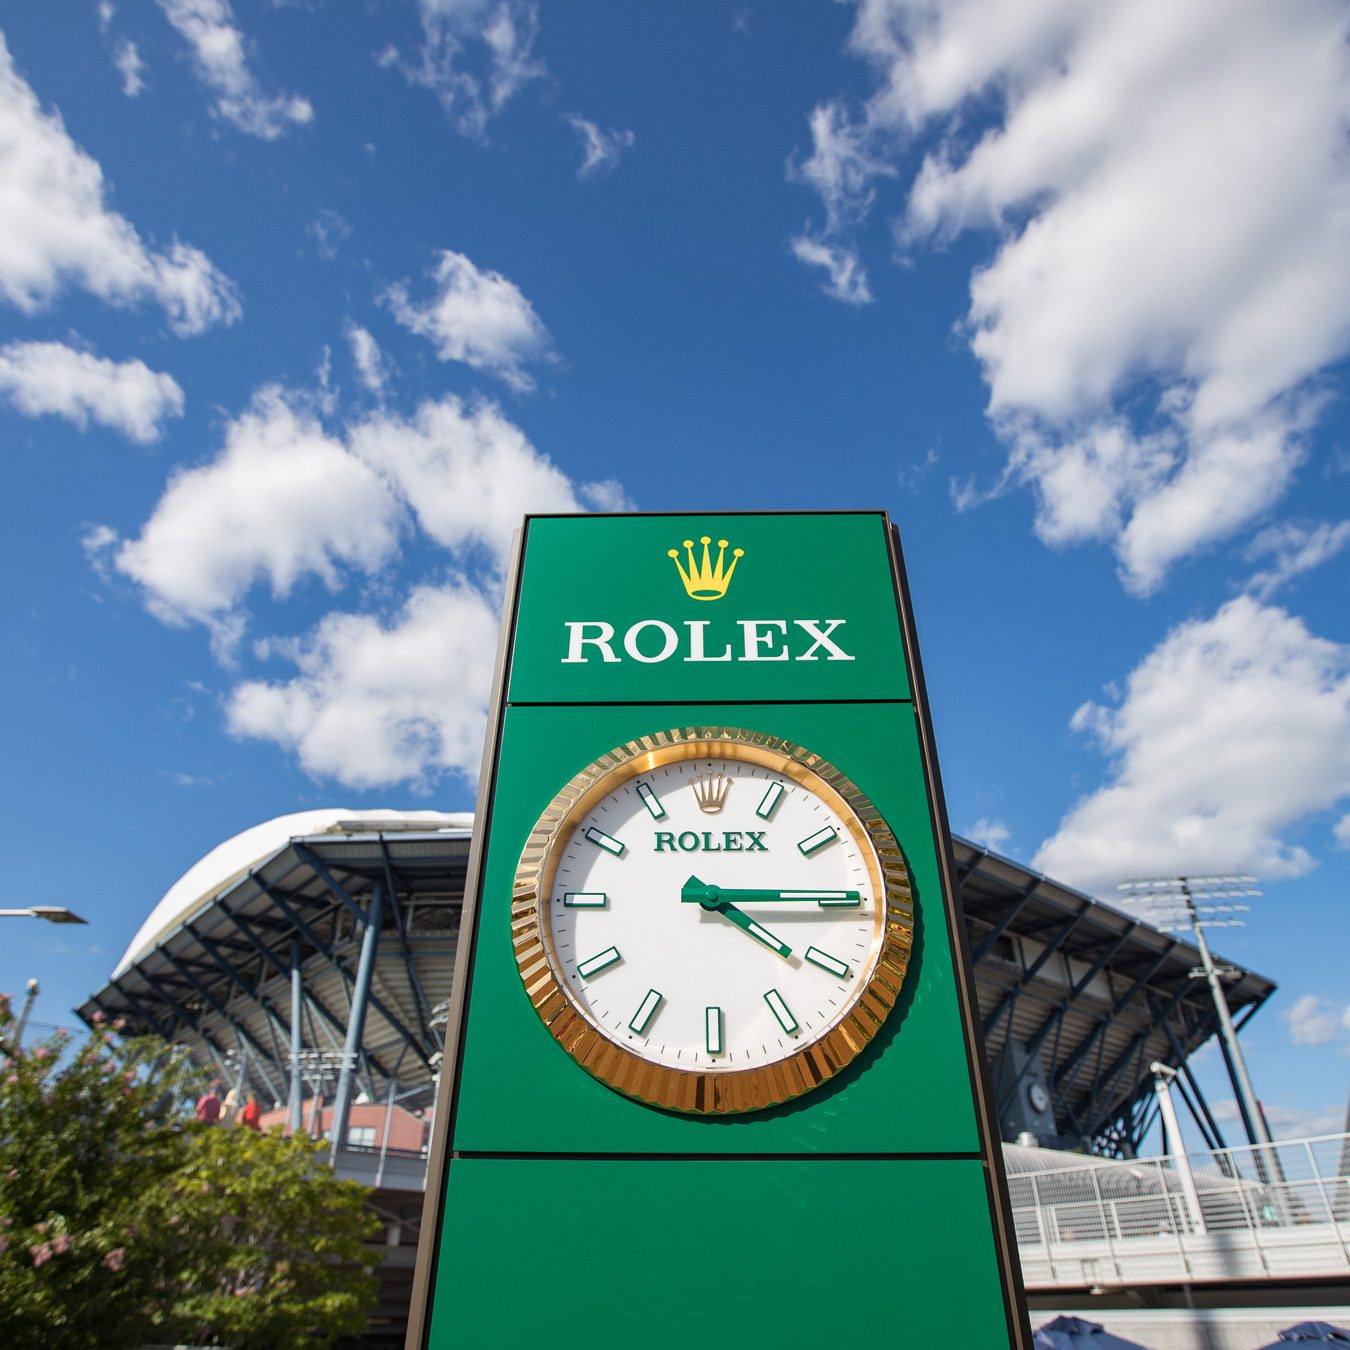 Rolex and Tennis, partners for over 45 years. Read more articles at laminedor.ca. An Official Rolex Retailer located in Canada.